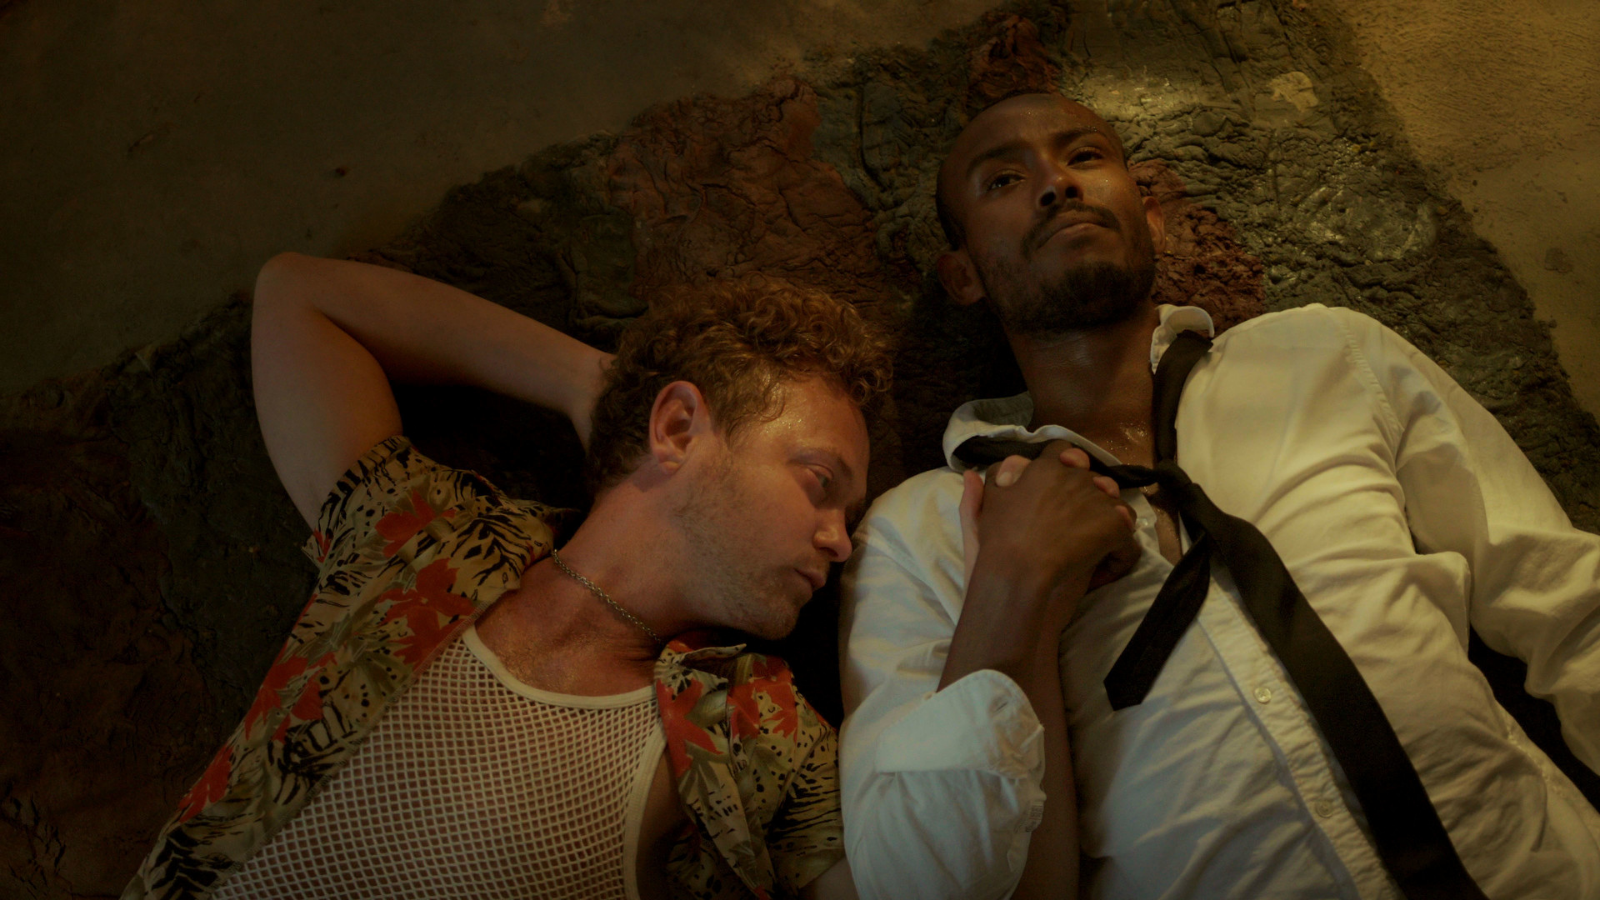 A still from BBQ & Apocalypse. Two men lie next to each other on the floor, holding hands.